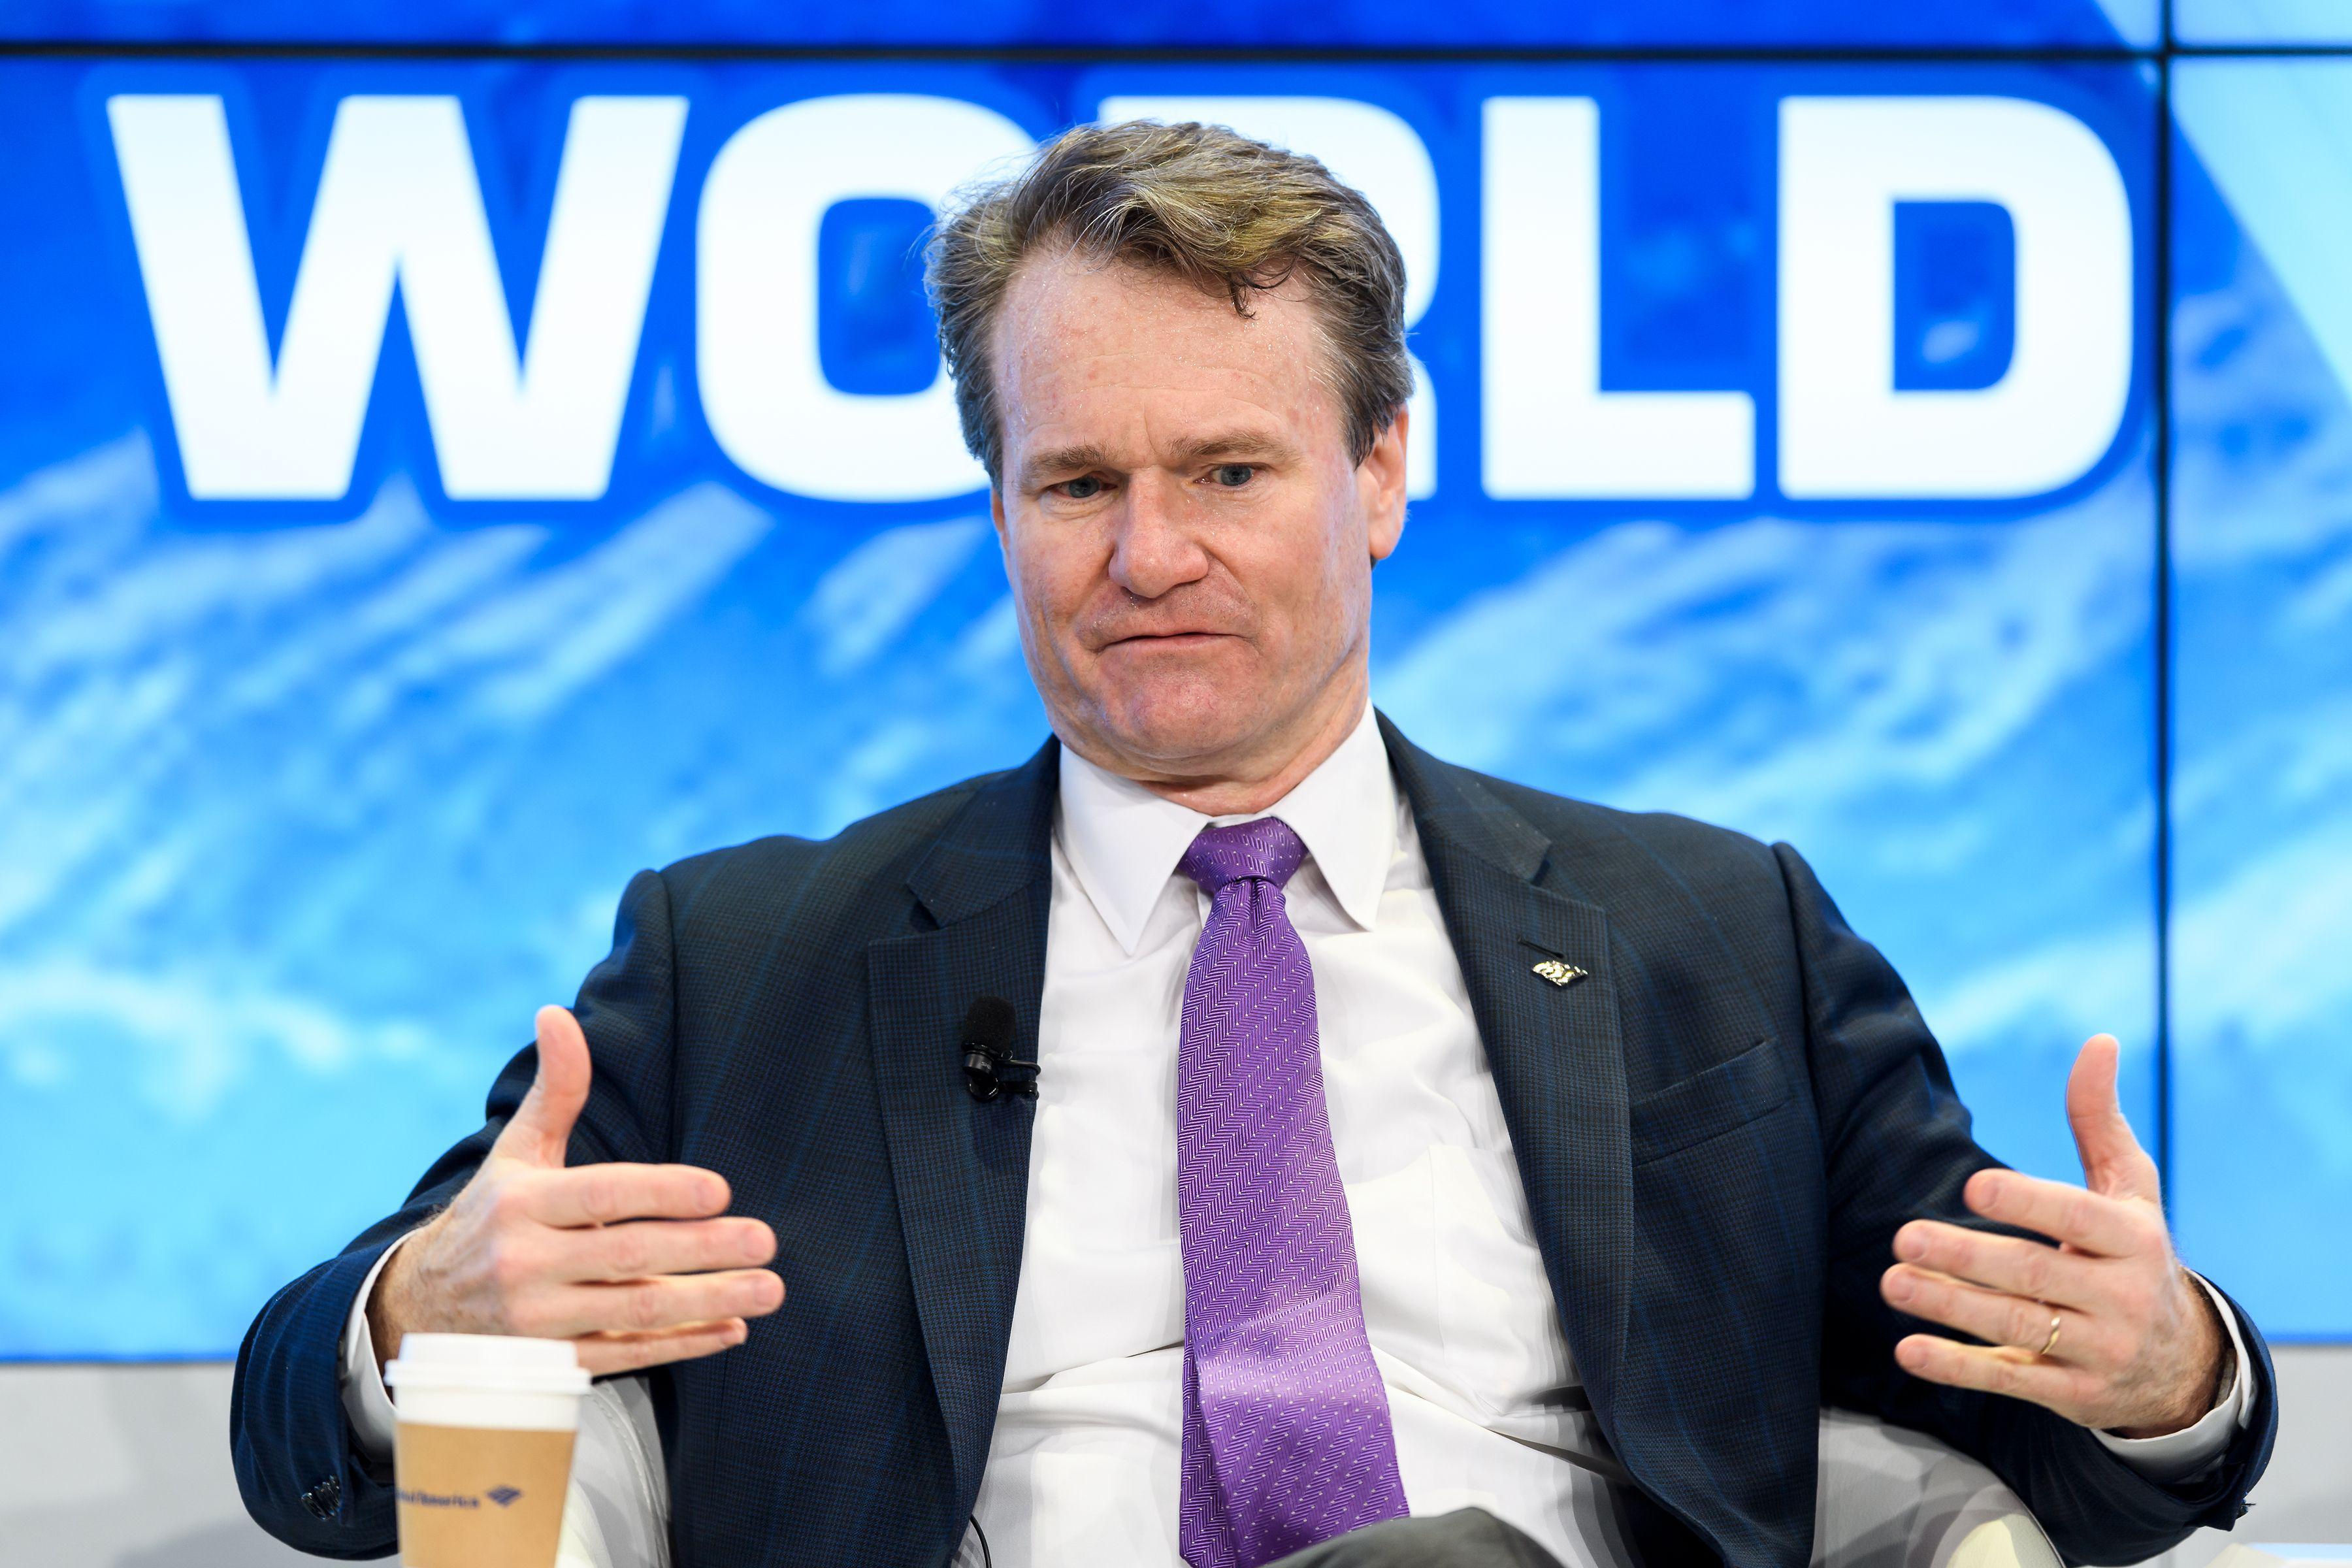 Bank of America Chaiman and CEO Brian Moynihan gestures while speaking during a session on the opening day of the World Economic Forum (WEF) 2018 annual meeting, on January 23, 2018 in Davos, eastern Switzerland. / AFP PHOTO / Fabrice COFFRINI        (Photo credit should read FABRICE COFFRINI/AFP/Getty Images)